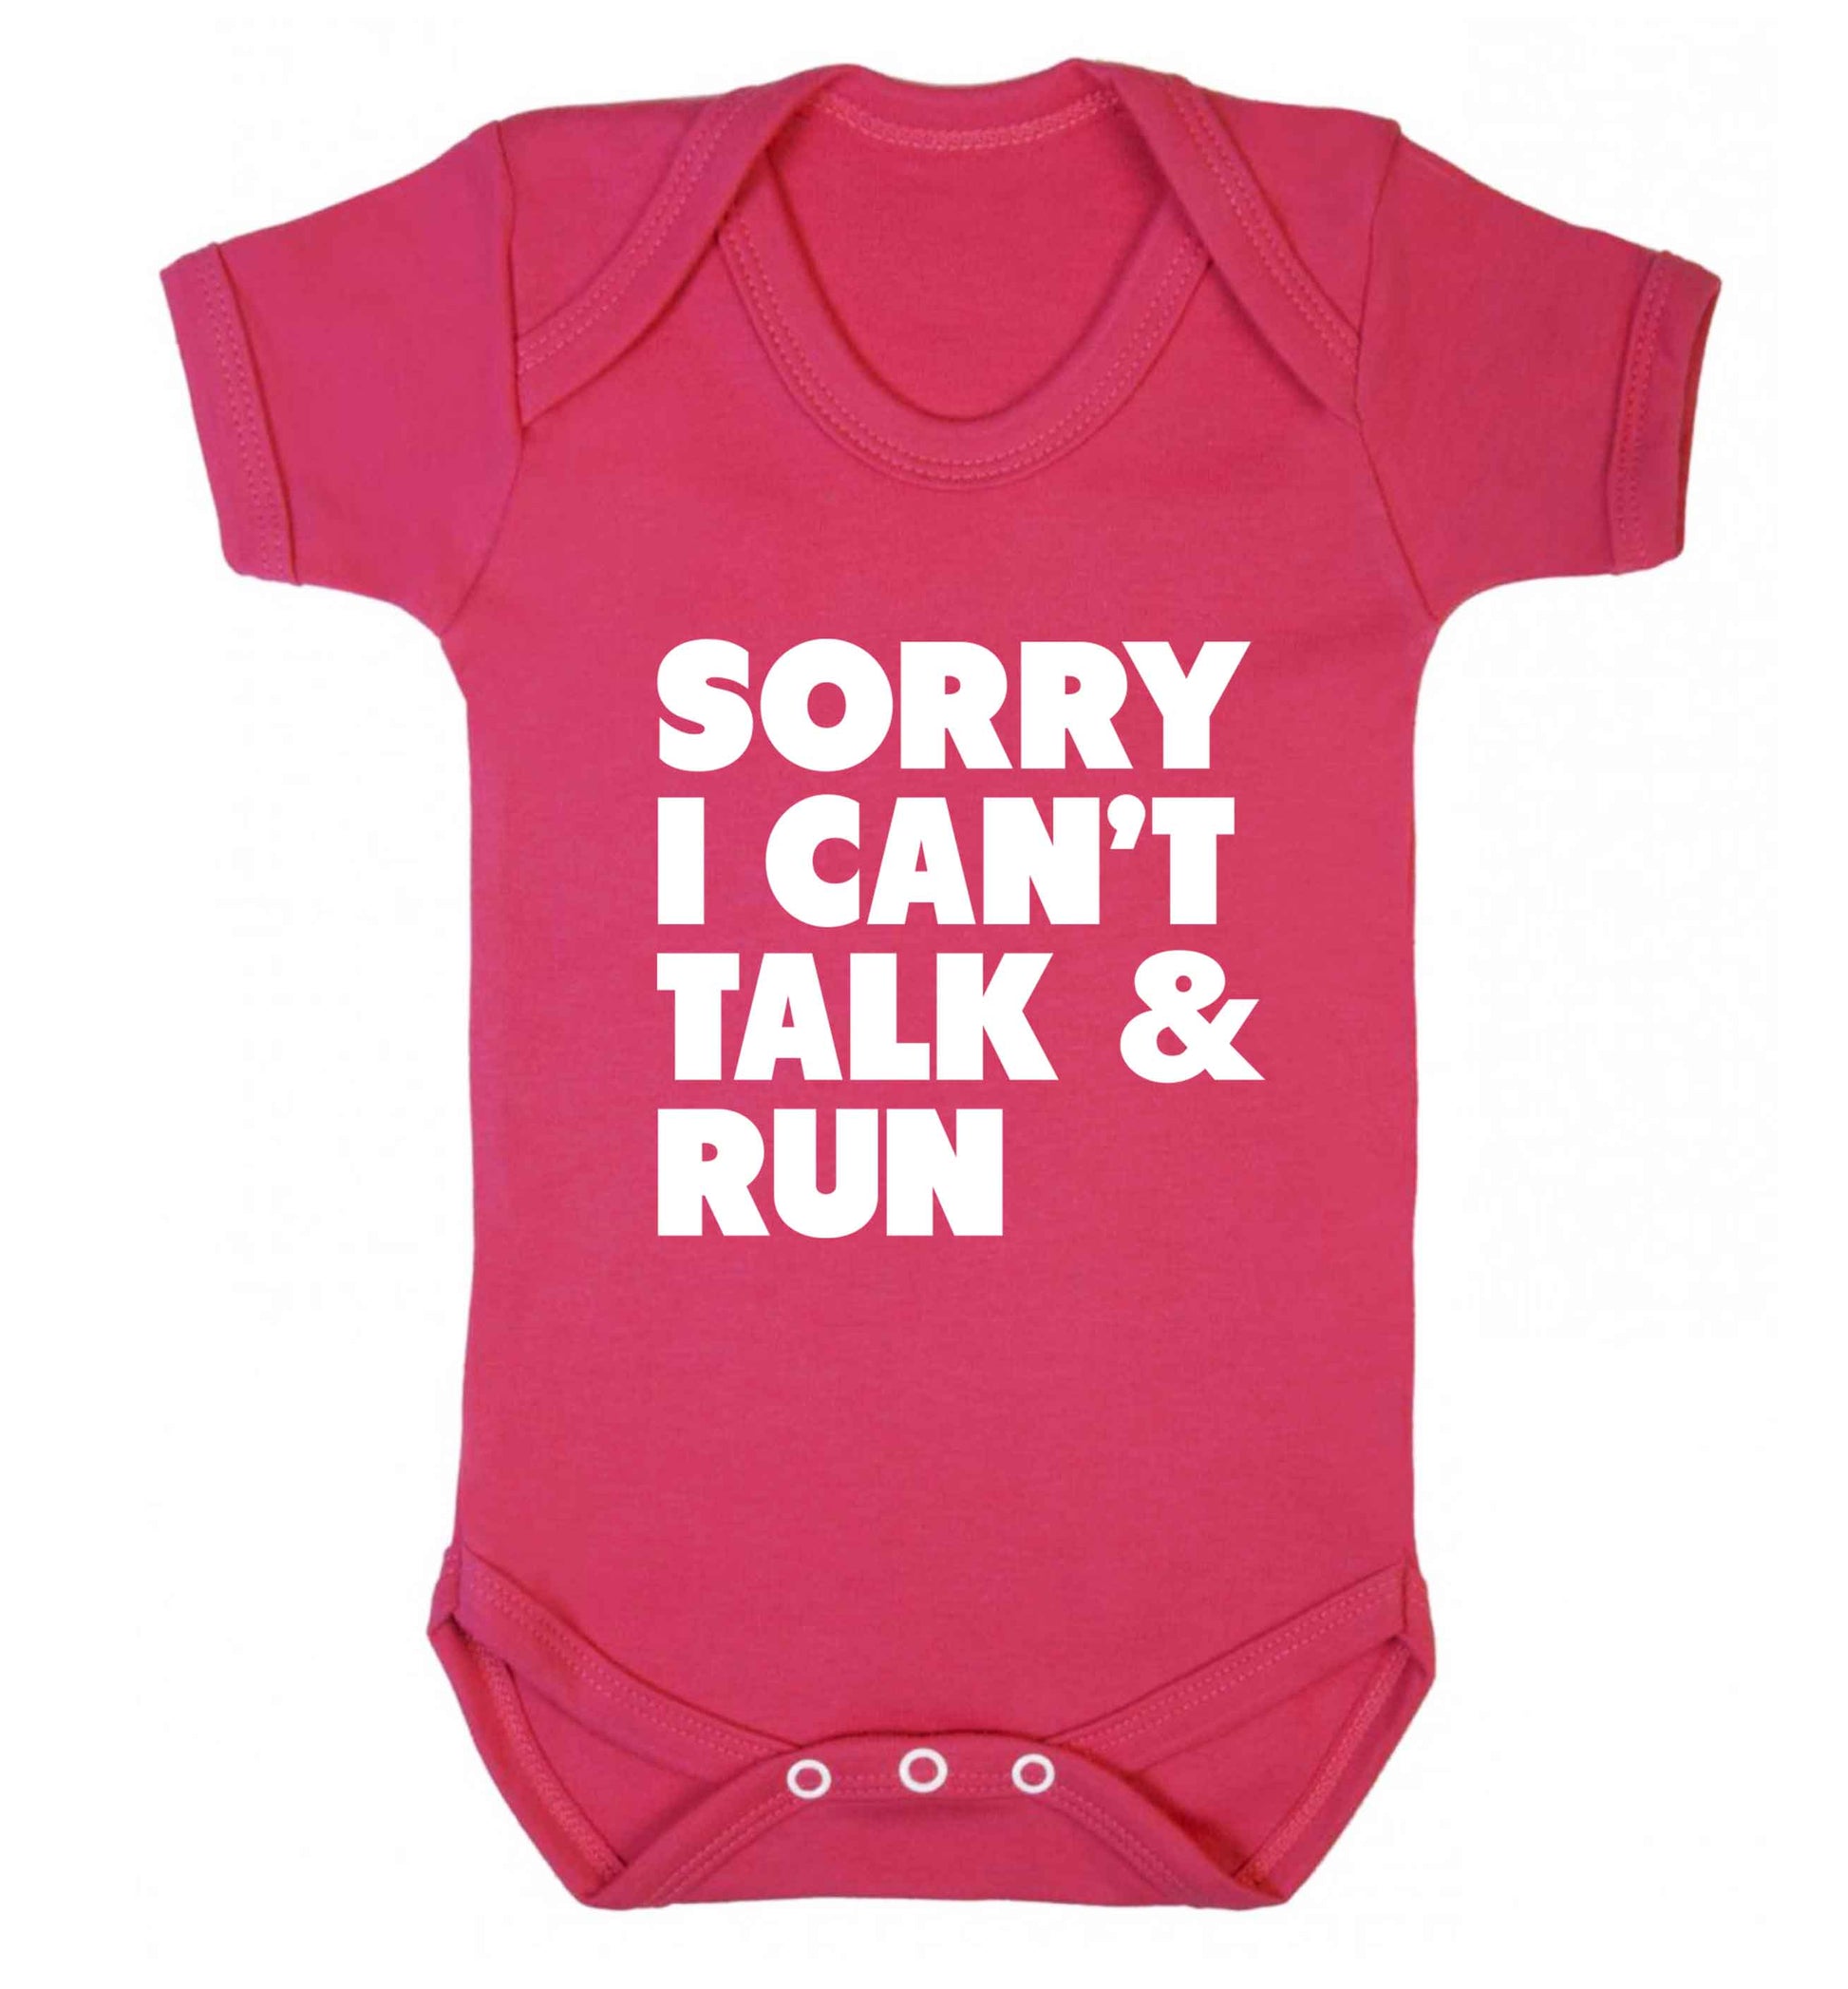 Sorry I can't talk and run baby vest dark pink 18-24 months